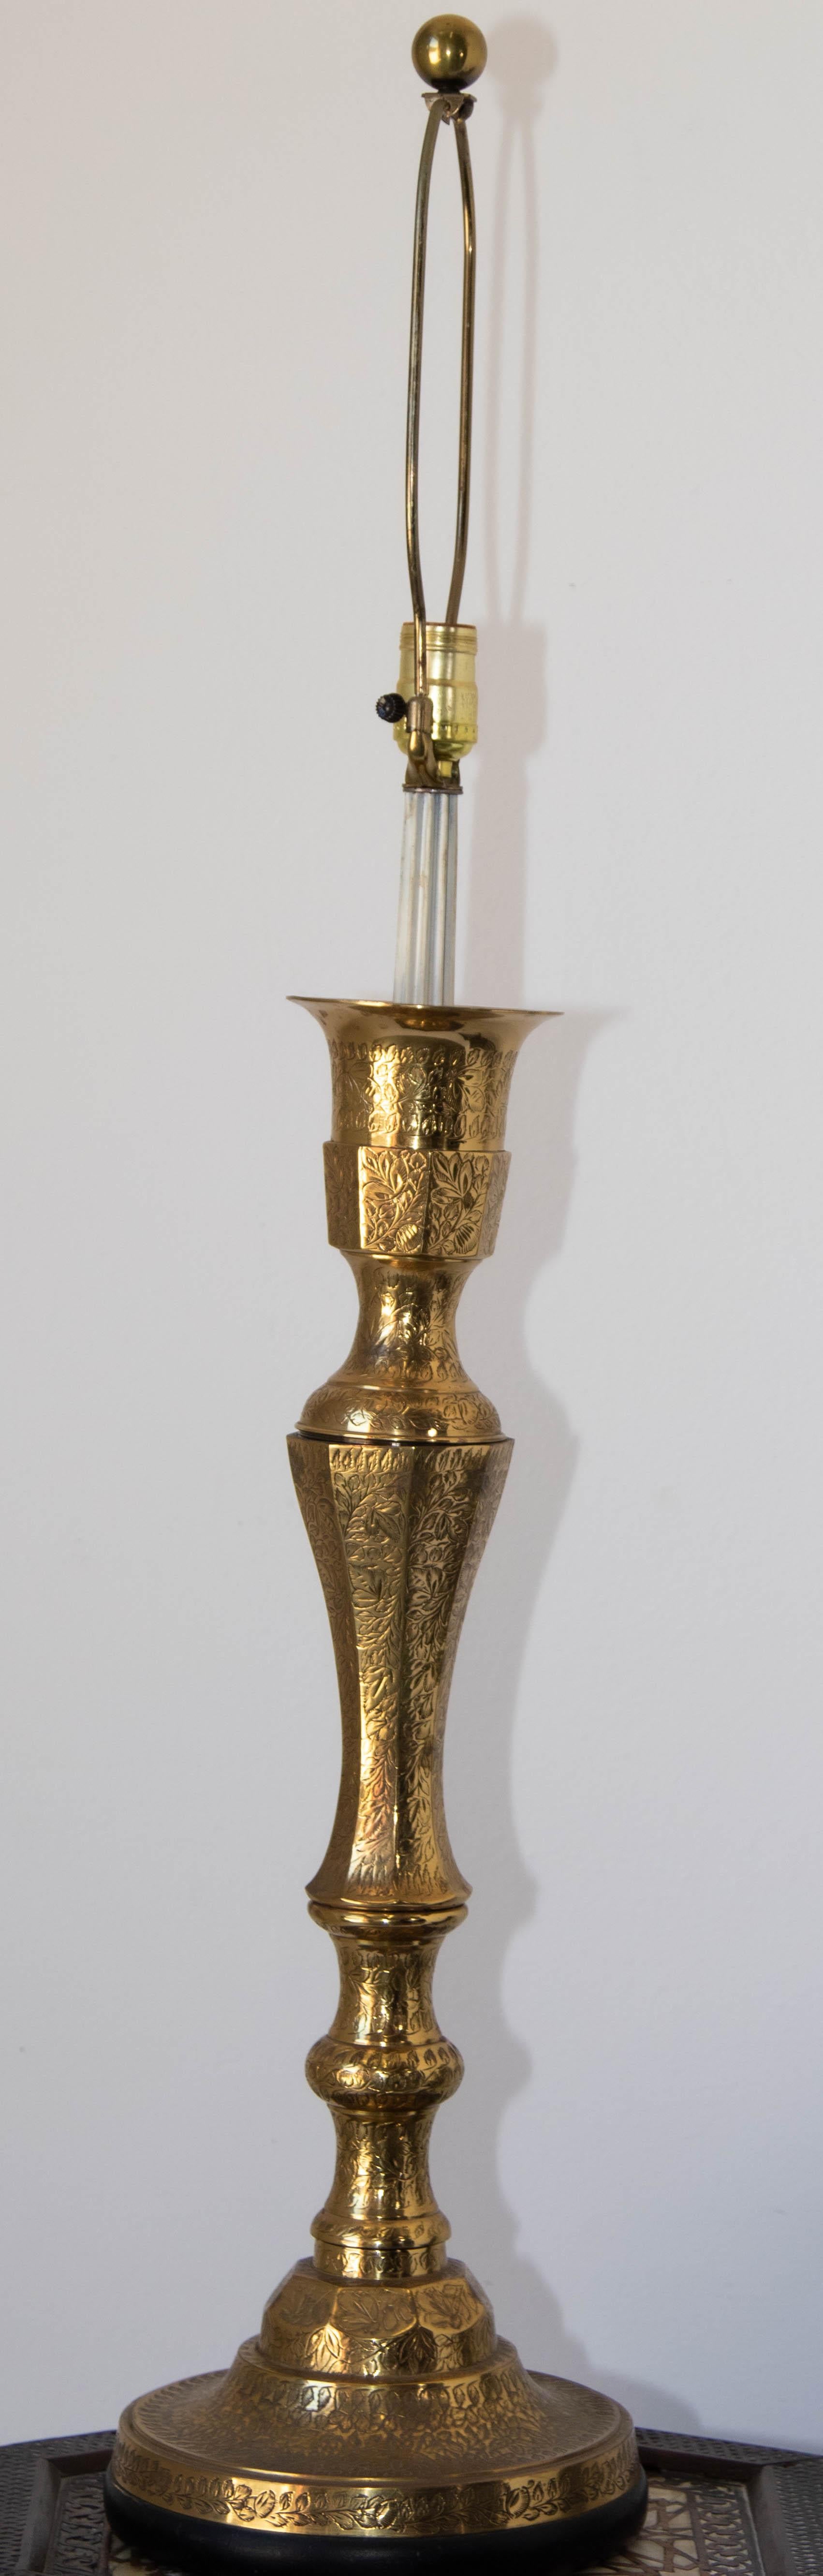 Anglo Raj Vintage Polished Etched Solid Brass Candle Holder Table Lamp India For Sale